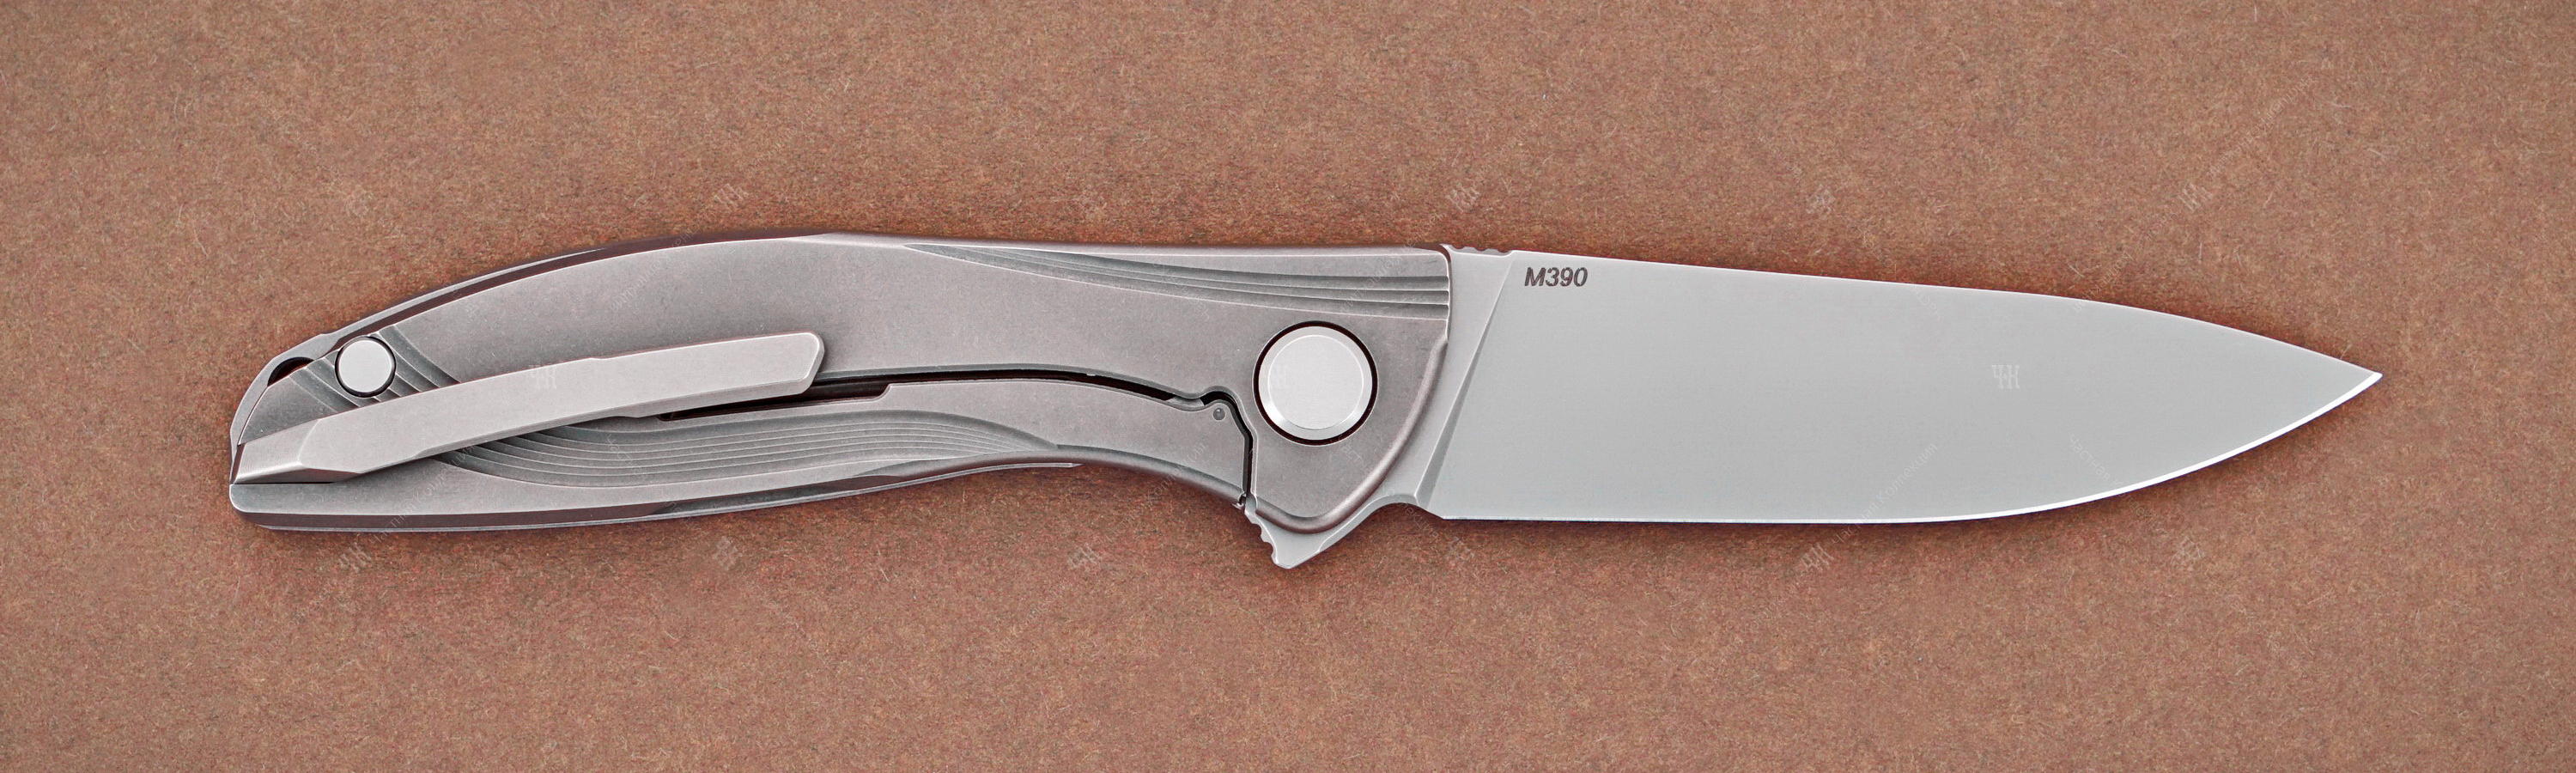 Blade of M390